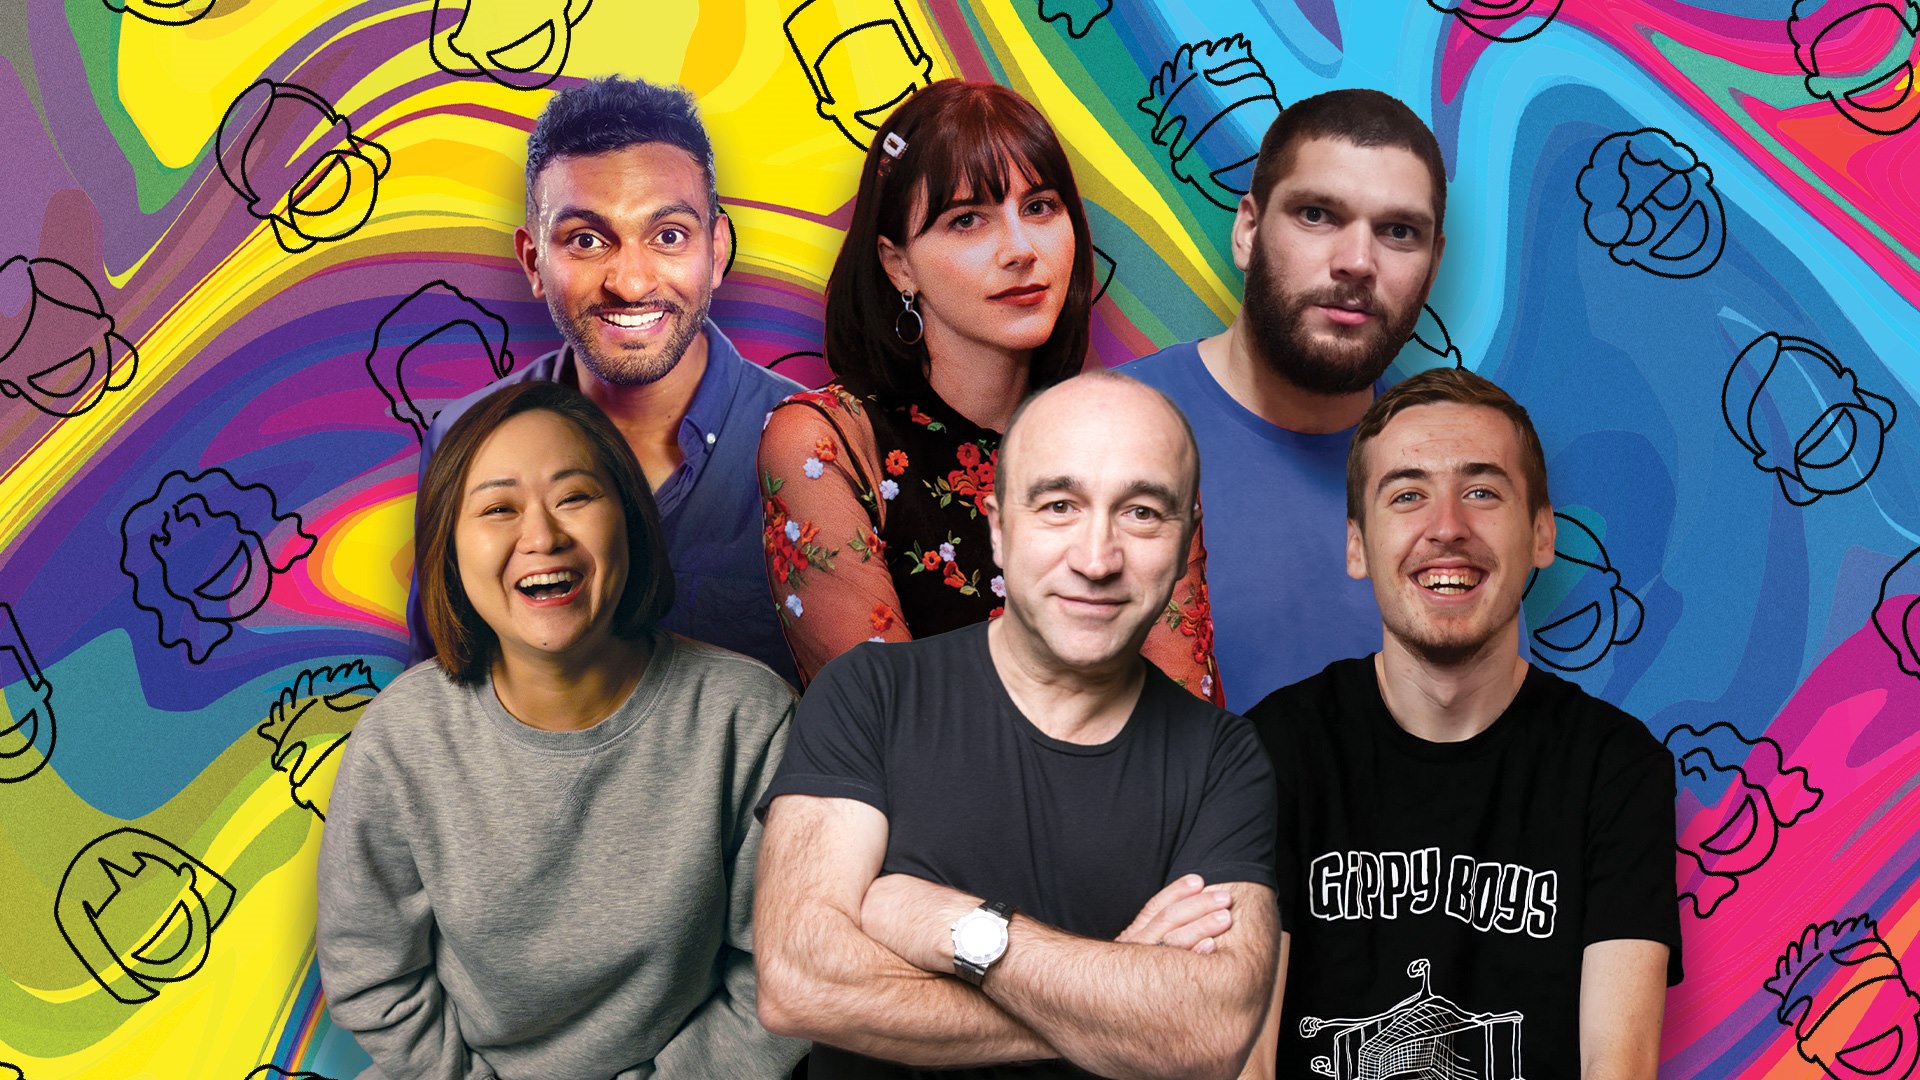 Promotional banner featuiring headshots of 6 comedians